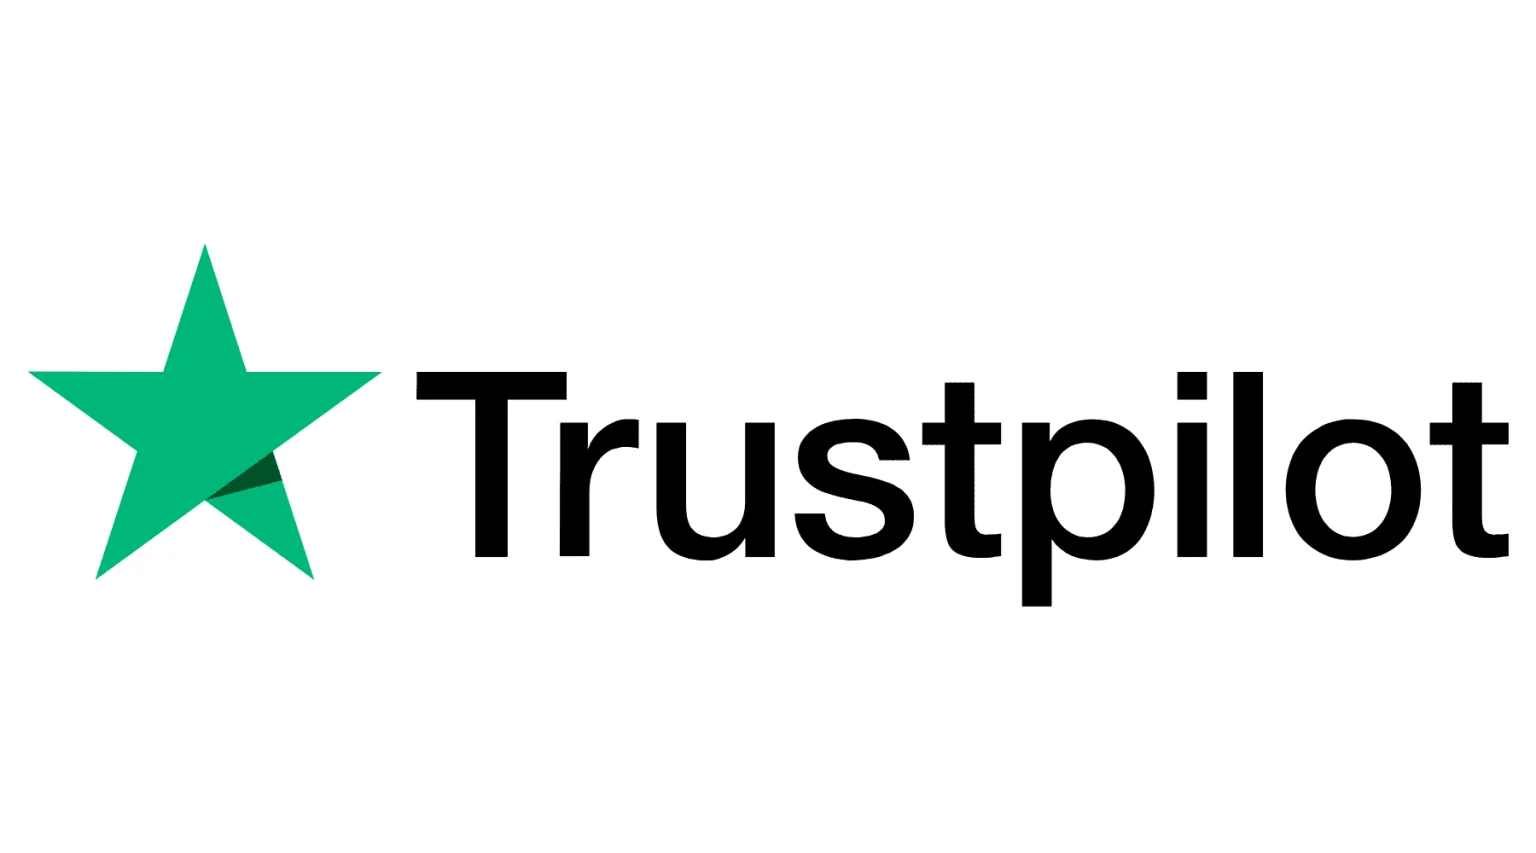 Online Reviews Site Trustpilot Unveils Plans For London IPO With Plans To Raise $50M And Hopes For A Market Value Of ~£1B (Tim Bradshaw/Financial Times)